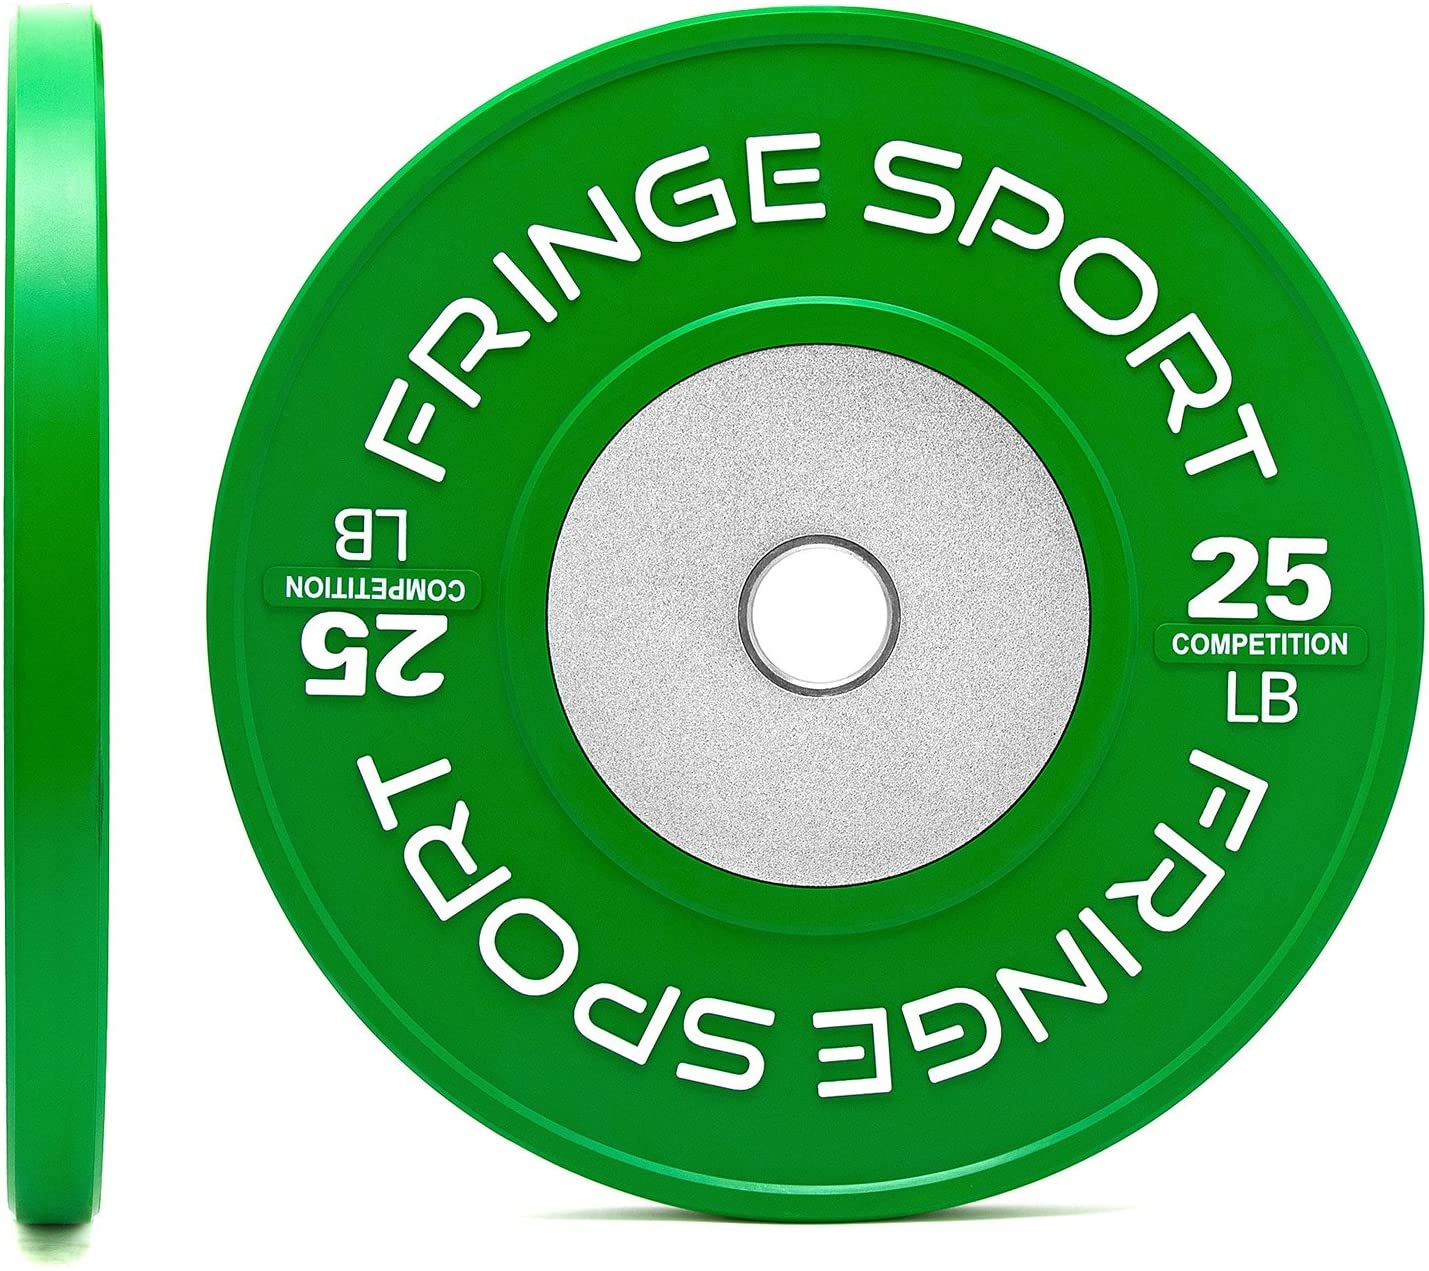 Fringe Sport Color Competition Bumper Plate Pairs in Pounds for Olympic...